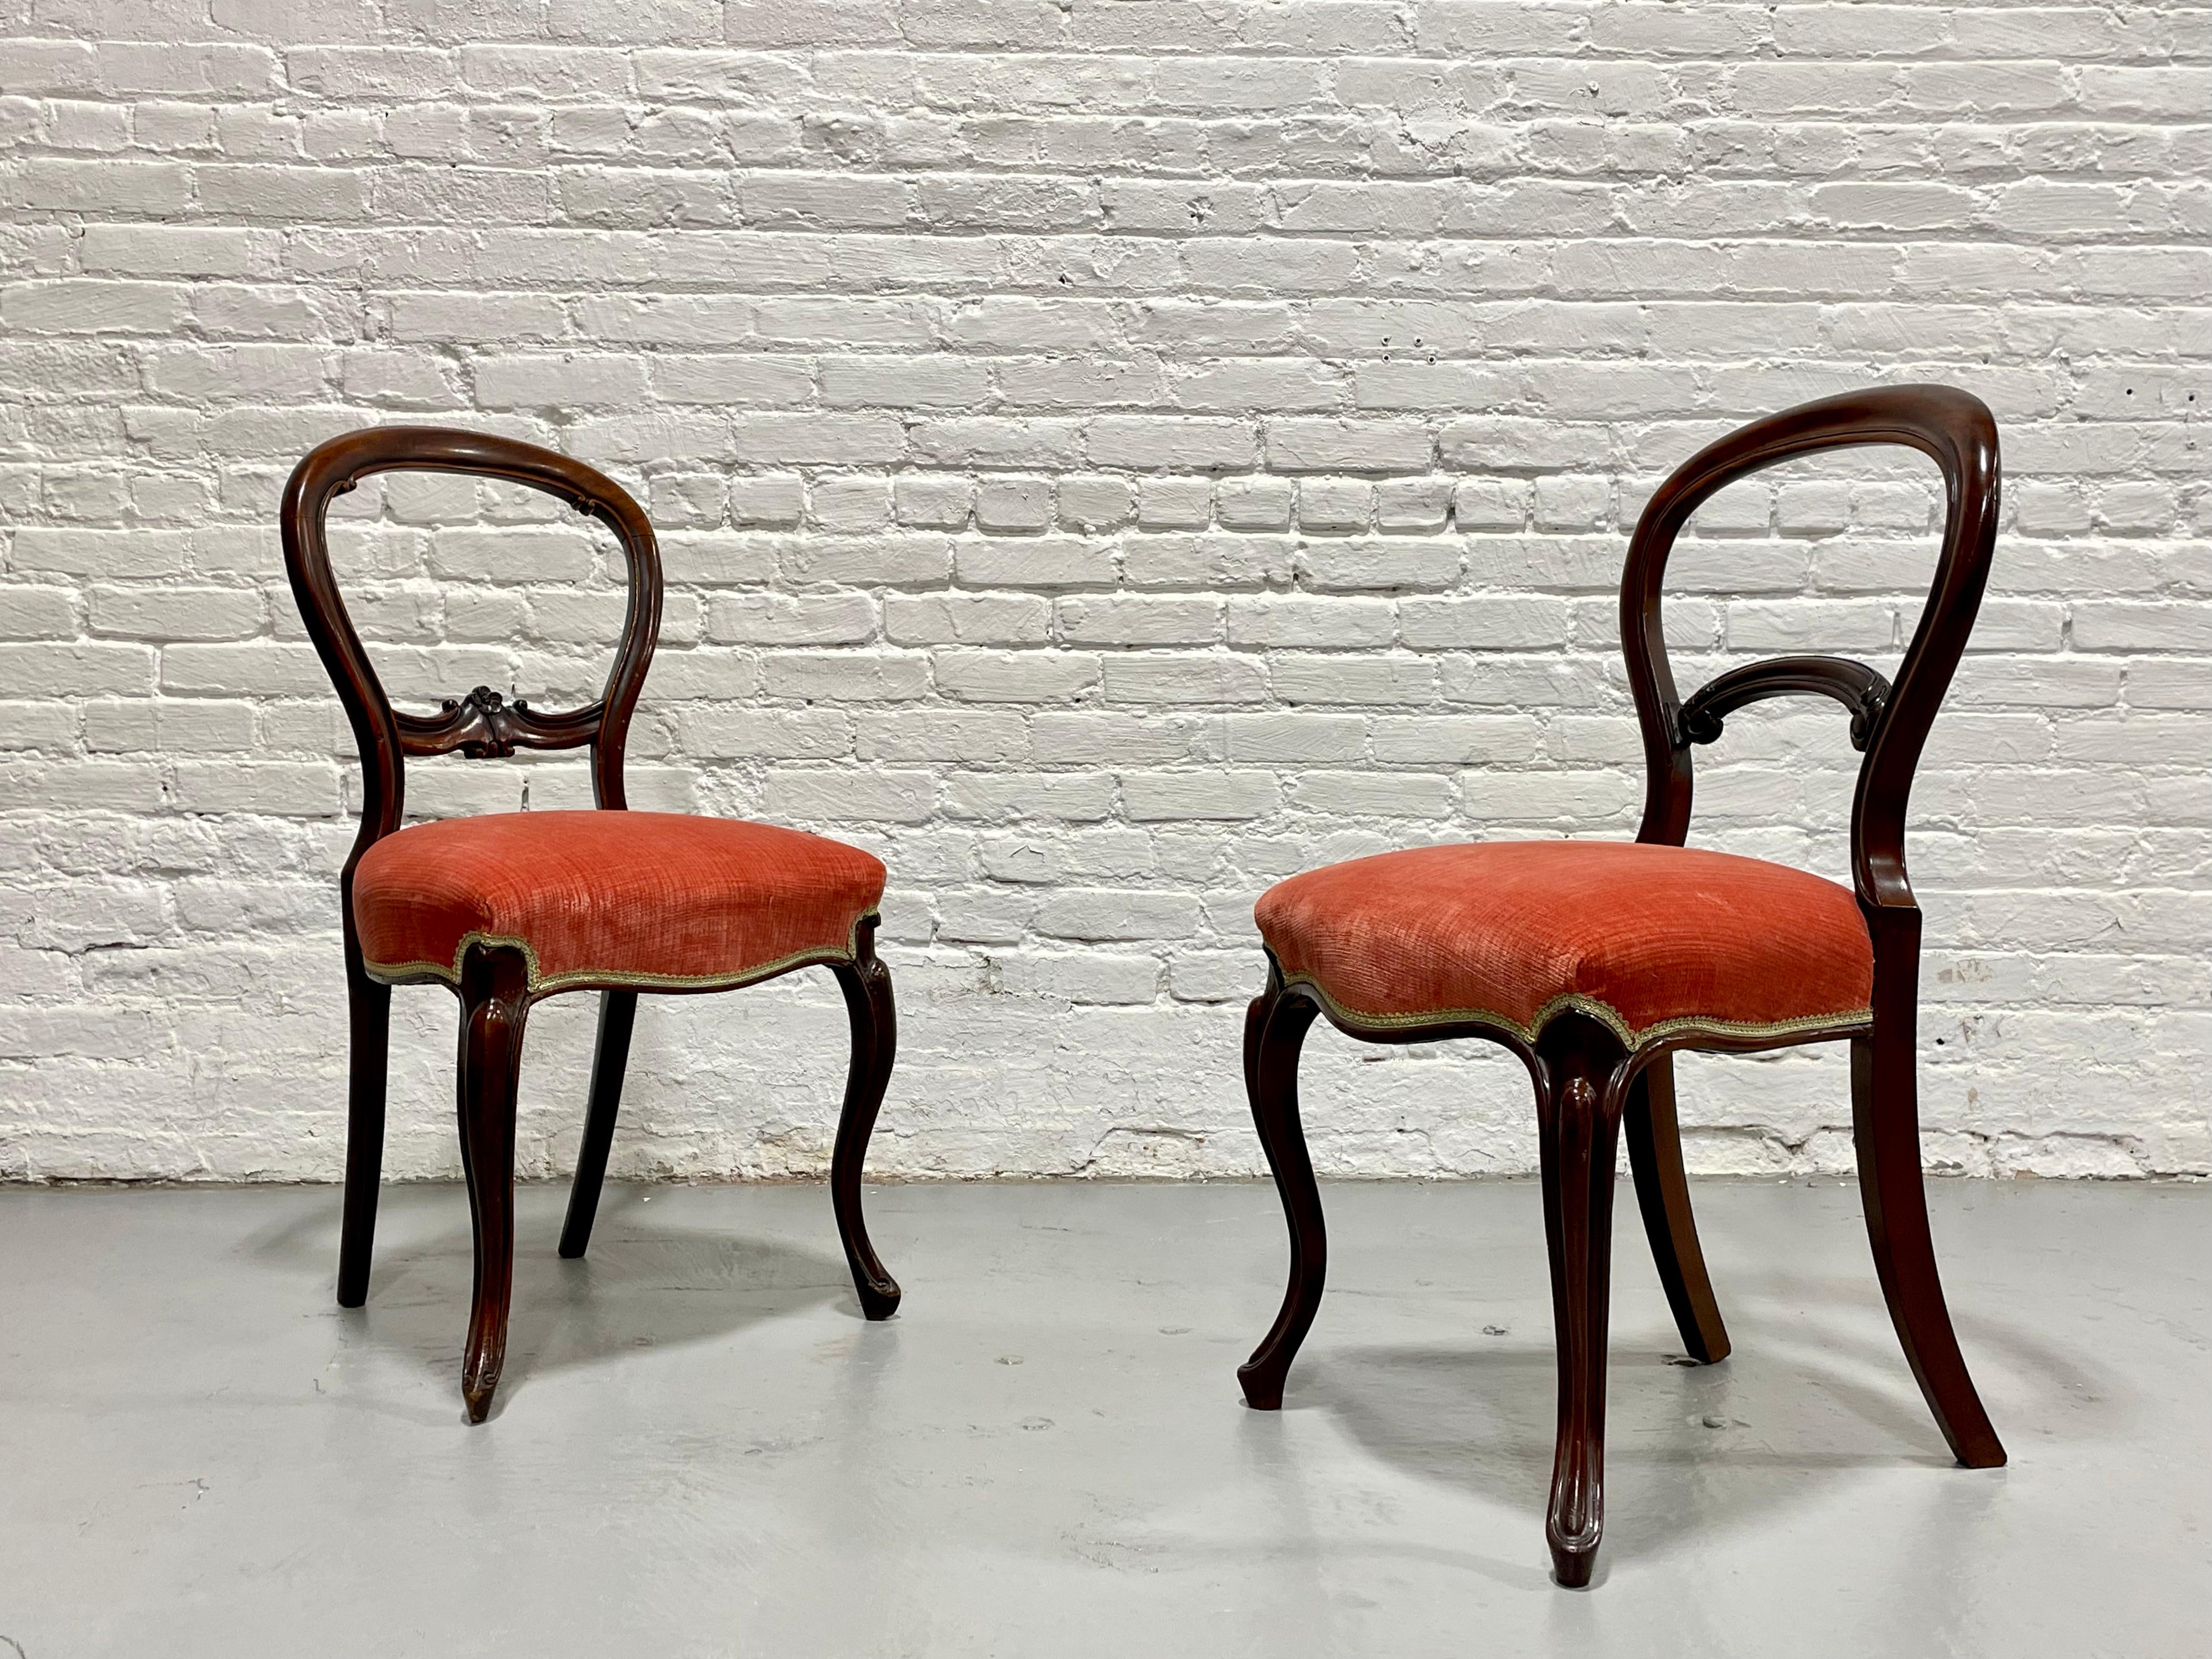 Pair of Antique VICTORIAN Balloon SIDE CHAIRS, c. 1870’s 9